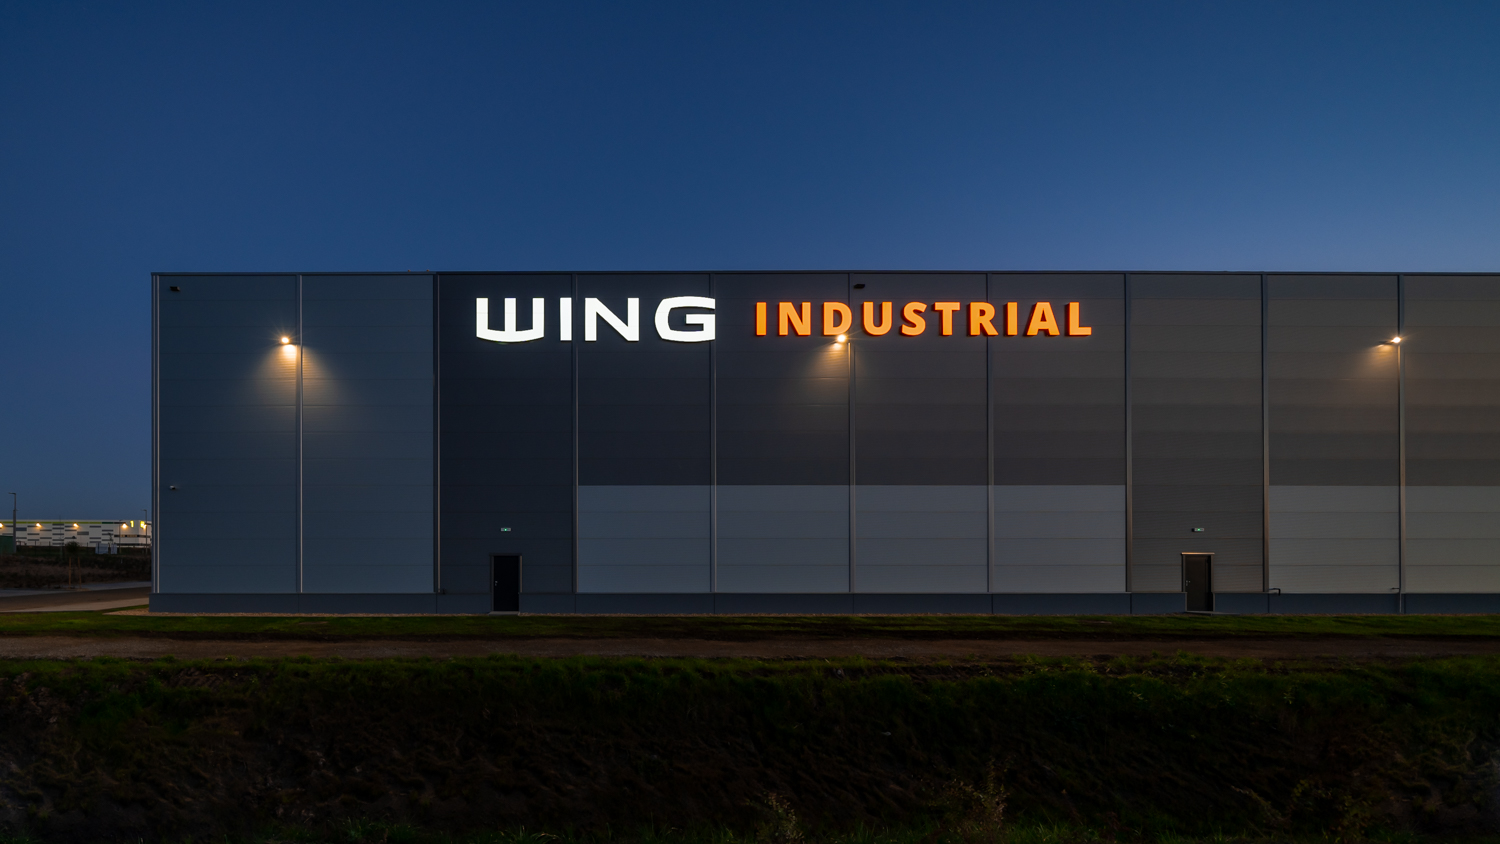 Another tenant chooses WING’s East Gate Pro Business Park